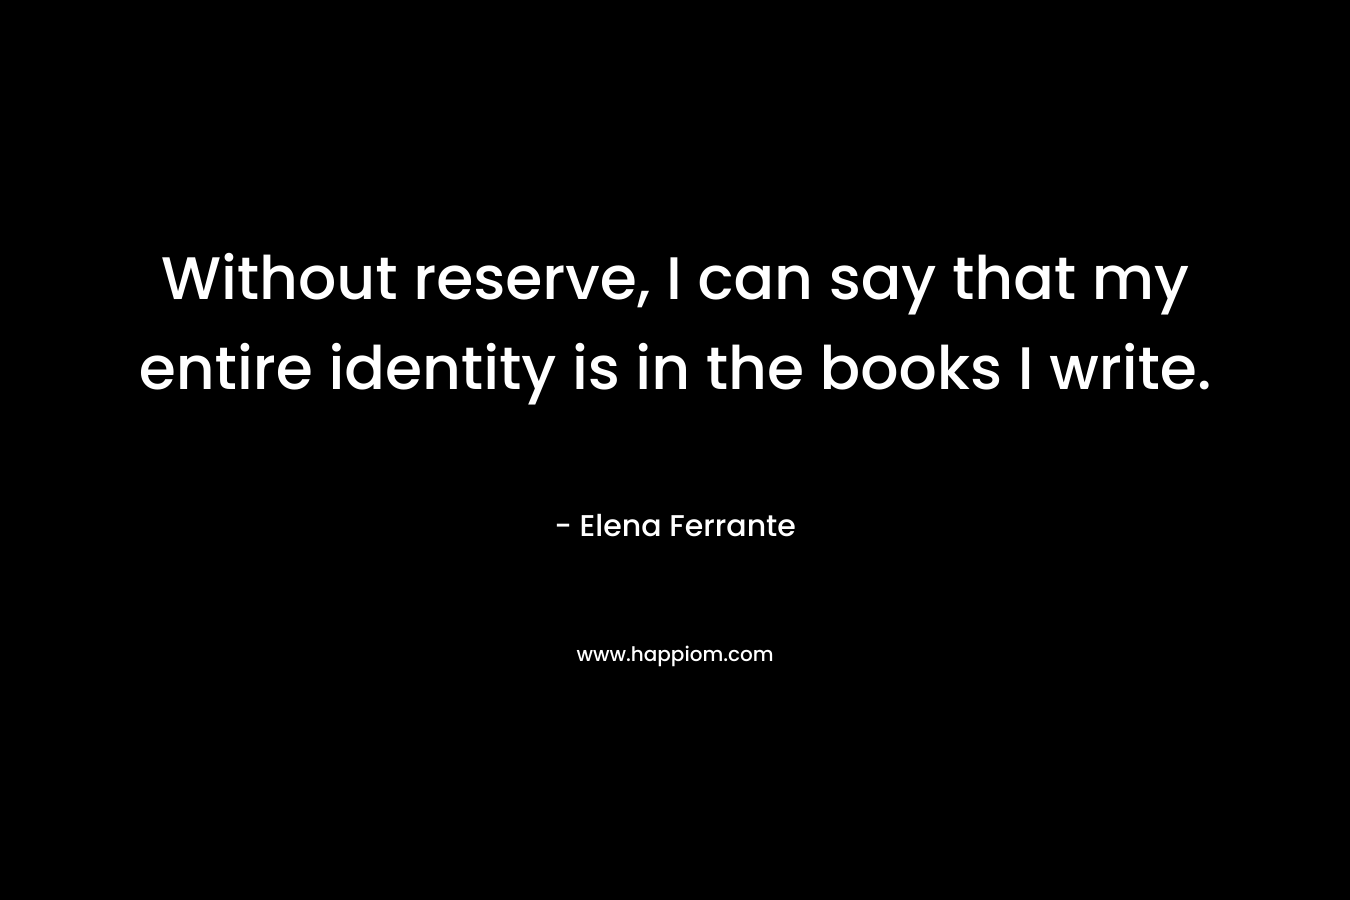 Without reserve, I can say that my entire identity is in the books I write. – Elena Ferrante